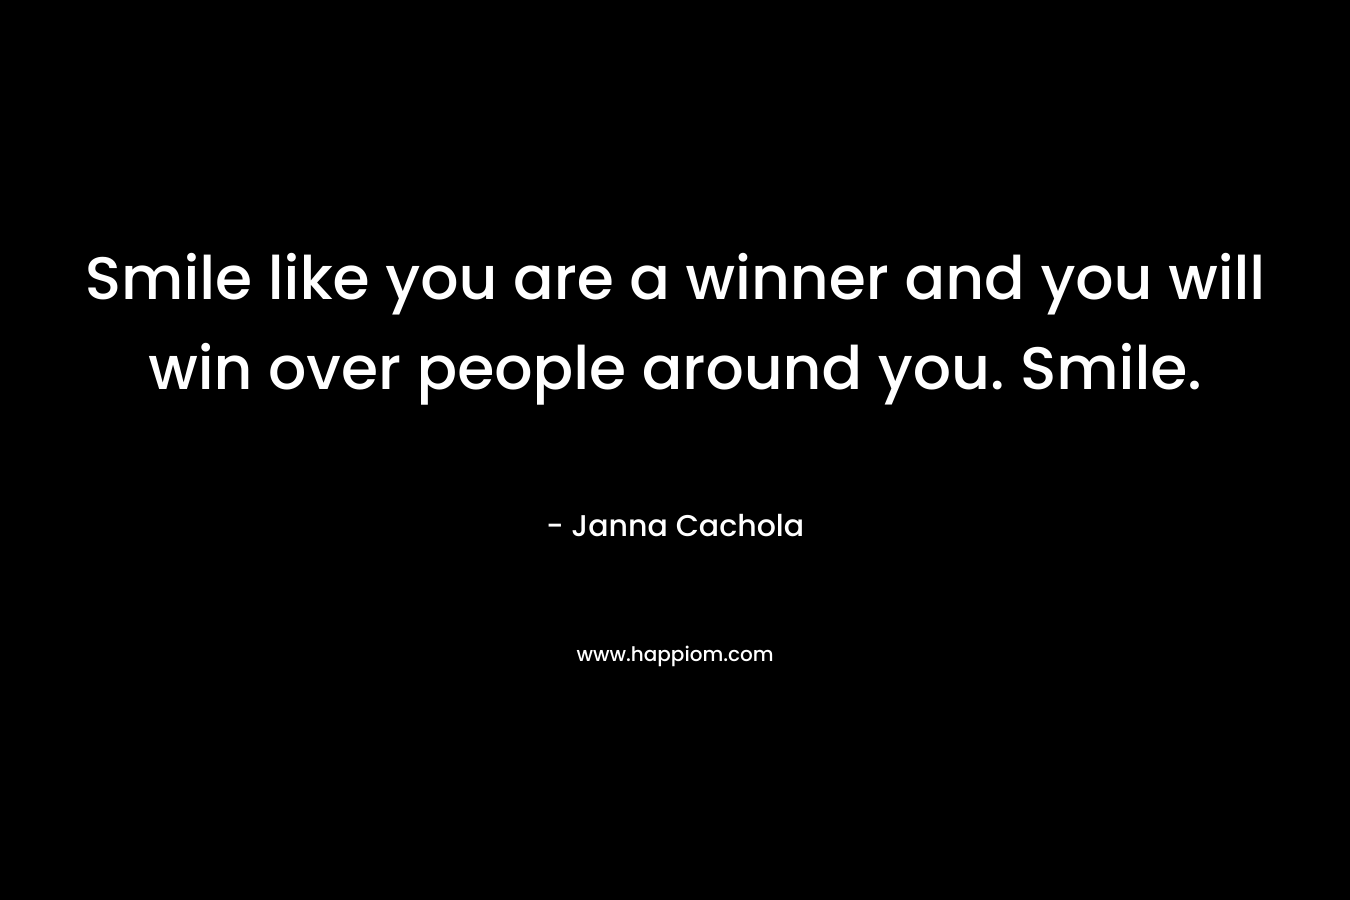 Smile like you are a winner and you will win over people around you. Smile.